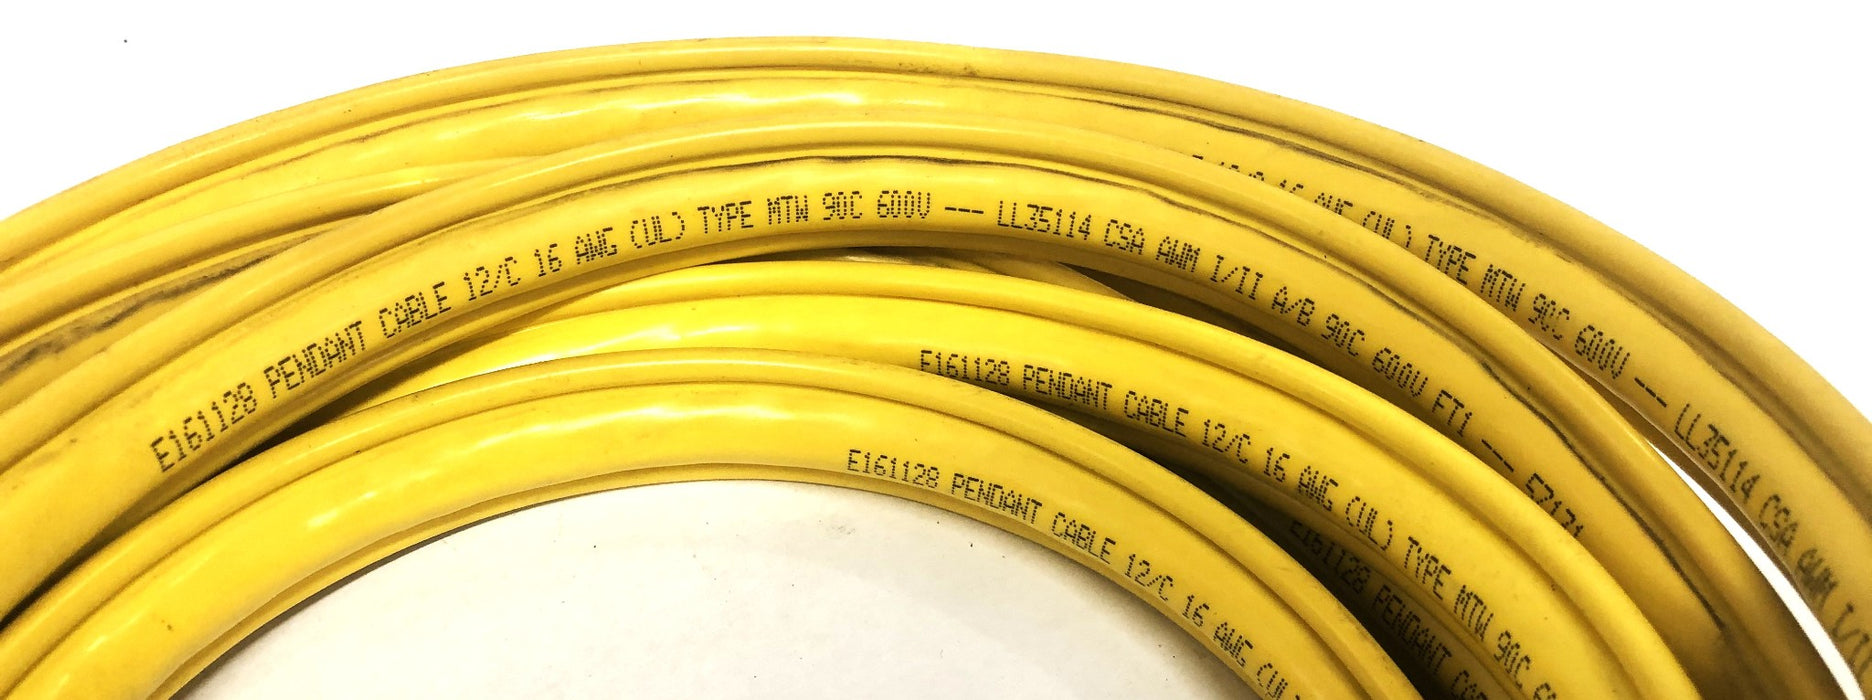 Electromotive Systems 154 Inch Pendant Cable E161128 USED